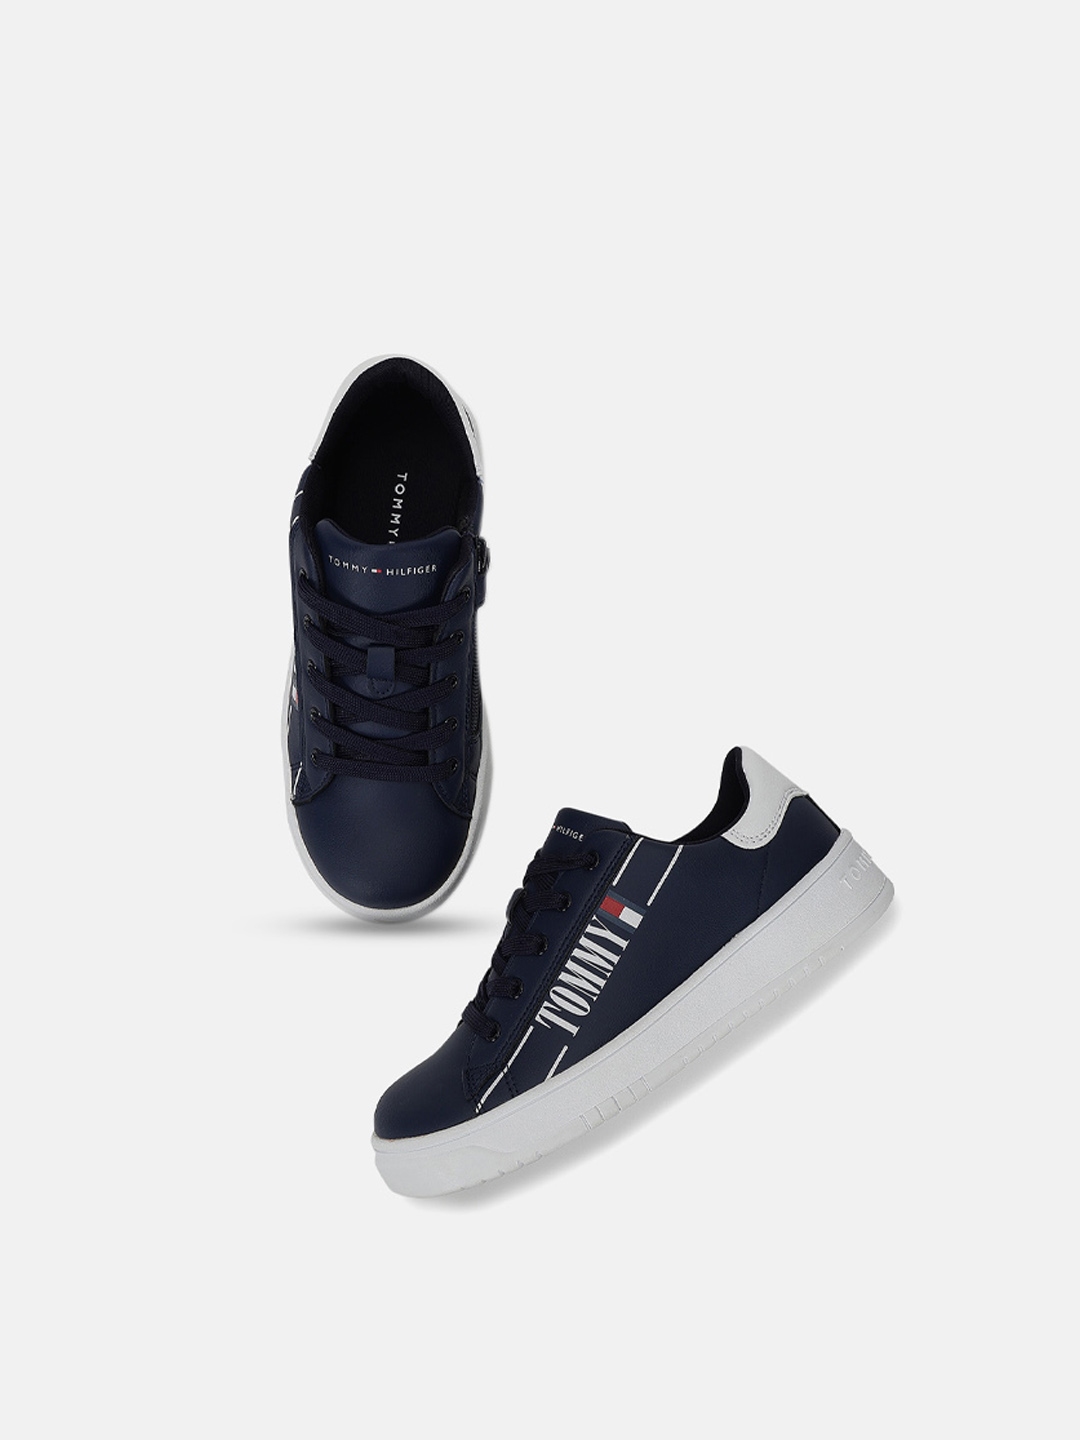 Buy Tommy Hilfiger Boys Comfort Contrast Sole Sneakers - Shoes for Boys 22628398 | Myntra